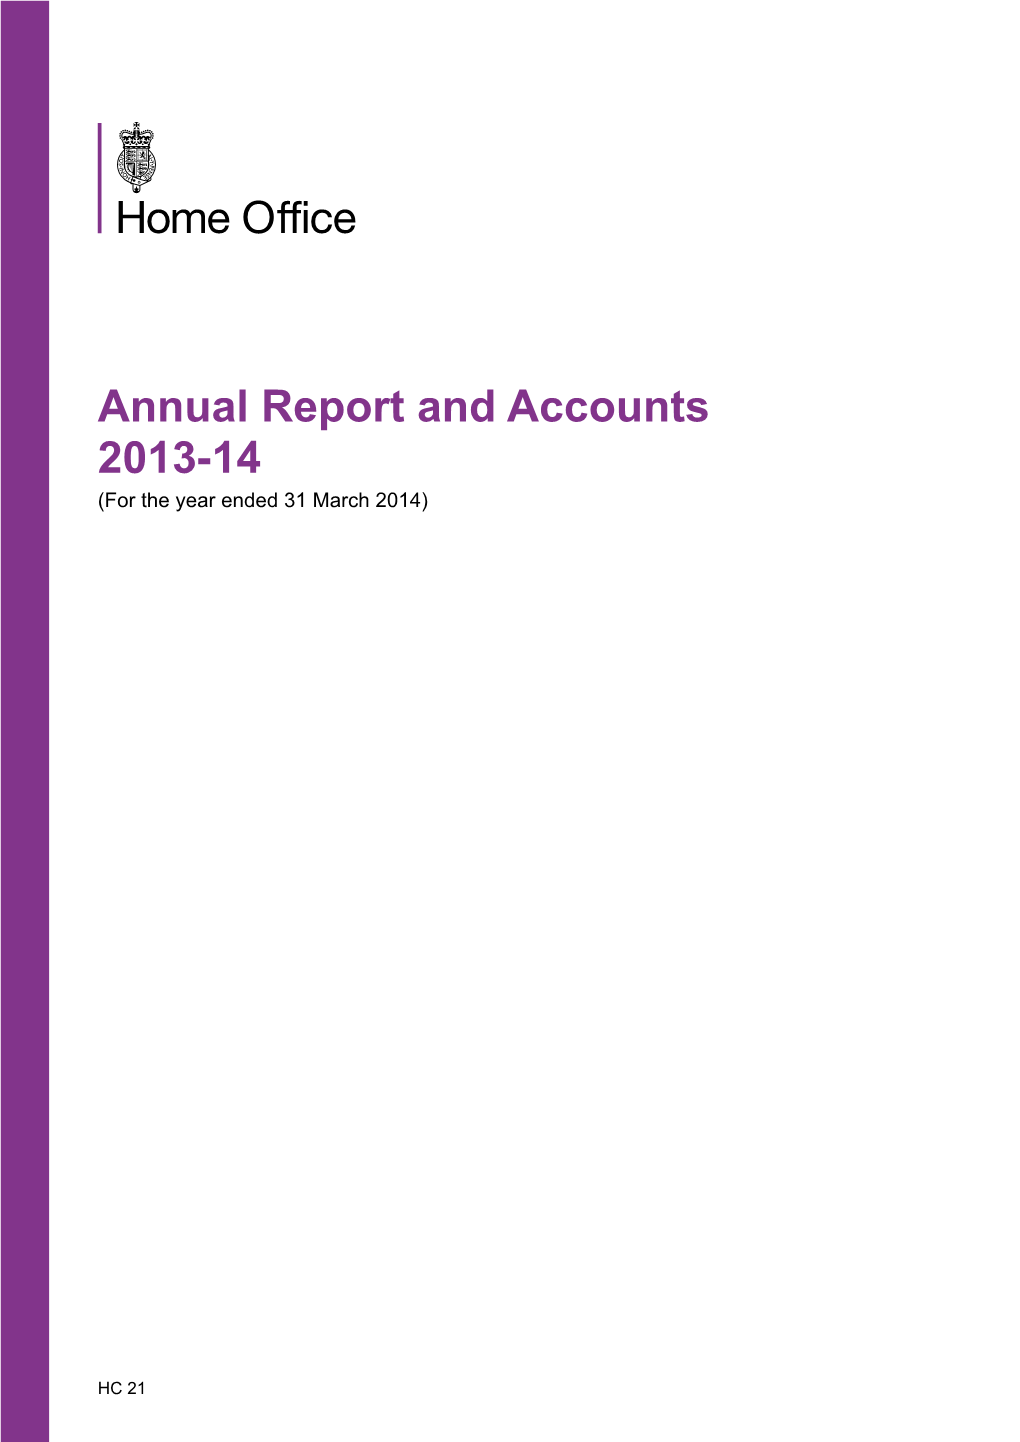 Annual Report and Accounts 2013-14 Annual Report and Accounts 2013-14 (For the Year Ended 31 March 2014)